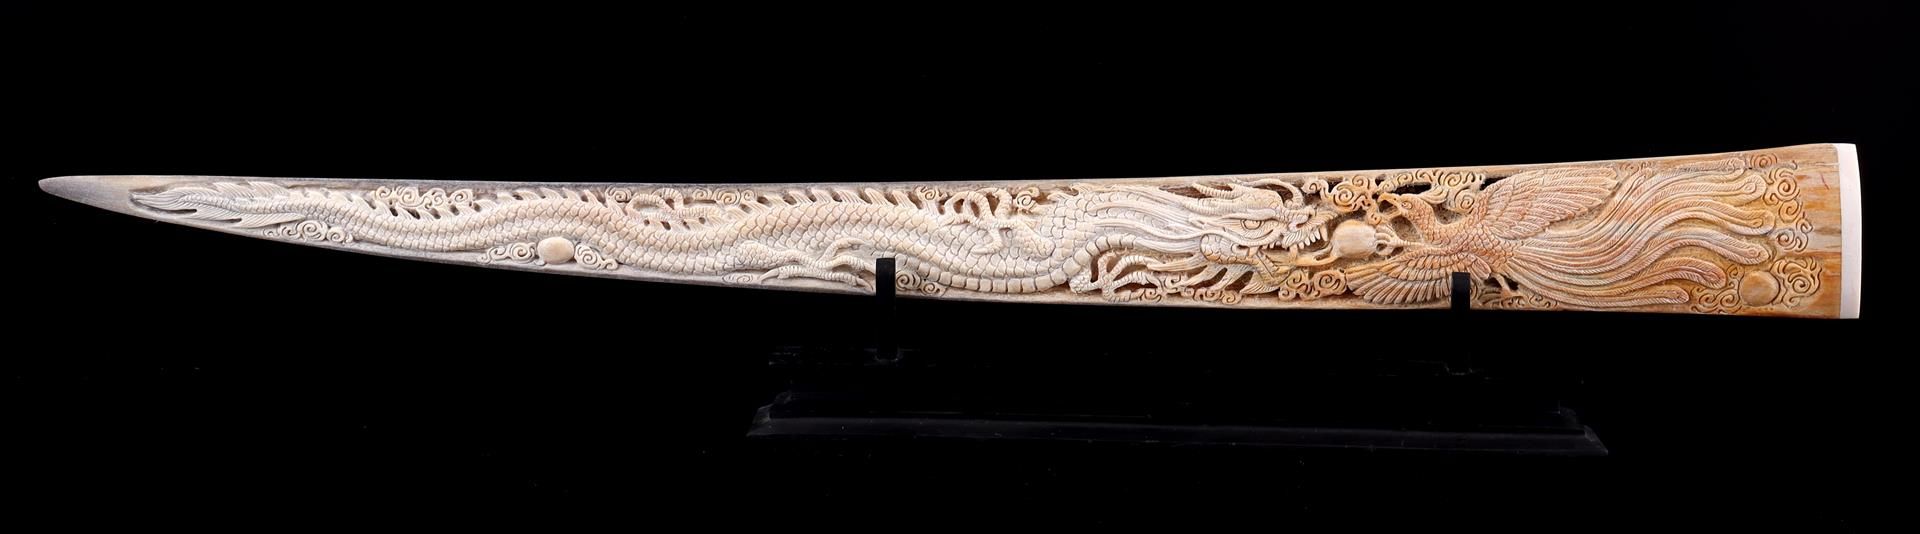 Swordfish tusk with finely hand-carved figure of the dragon